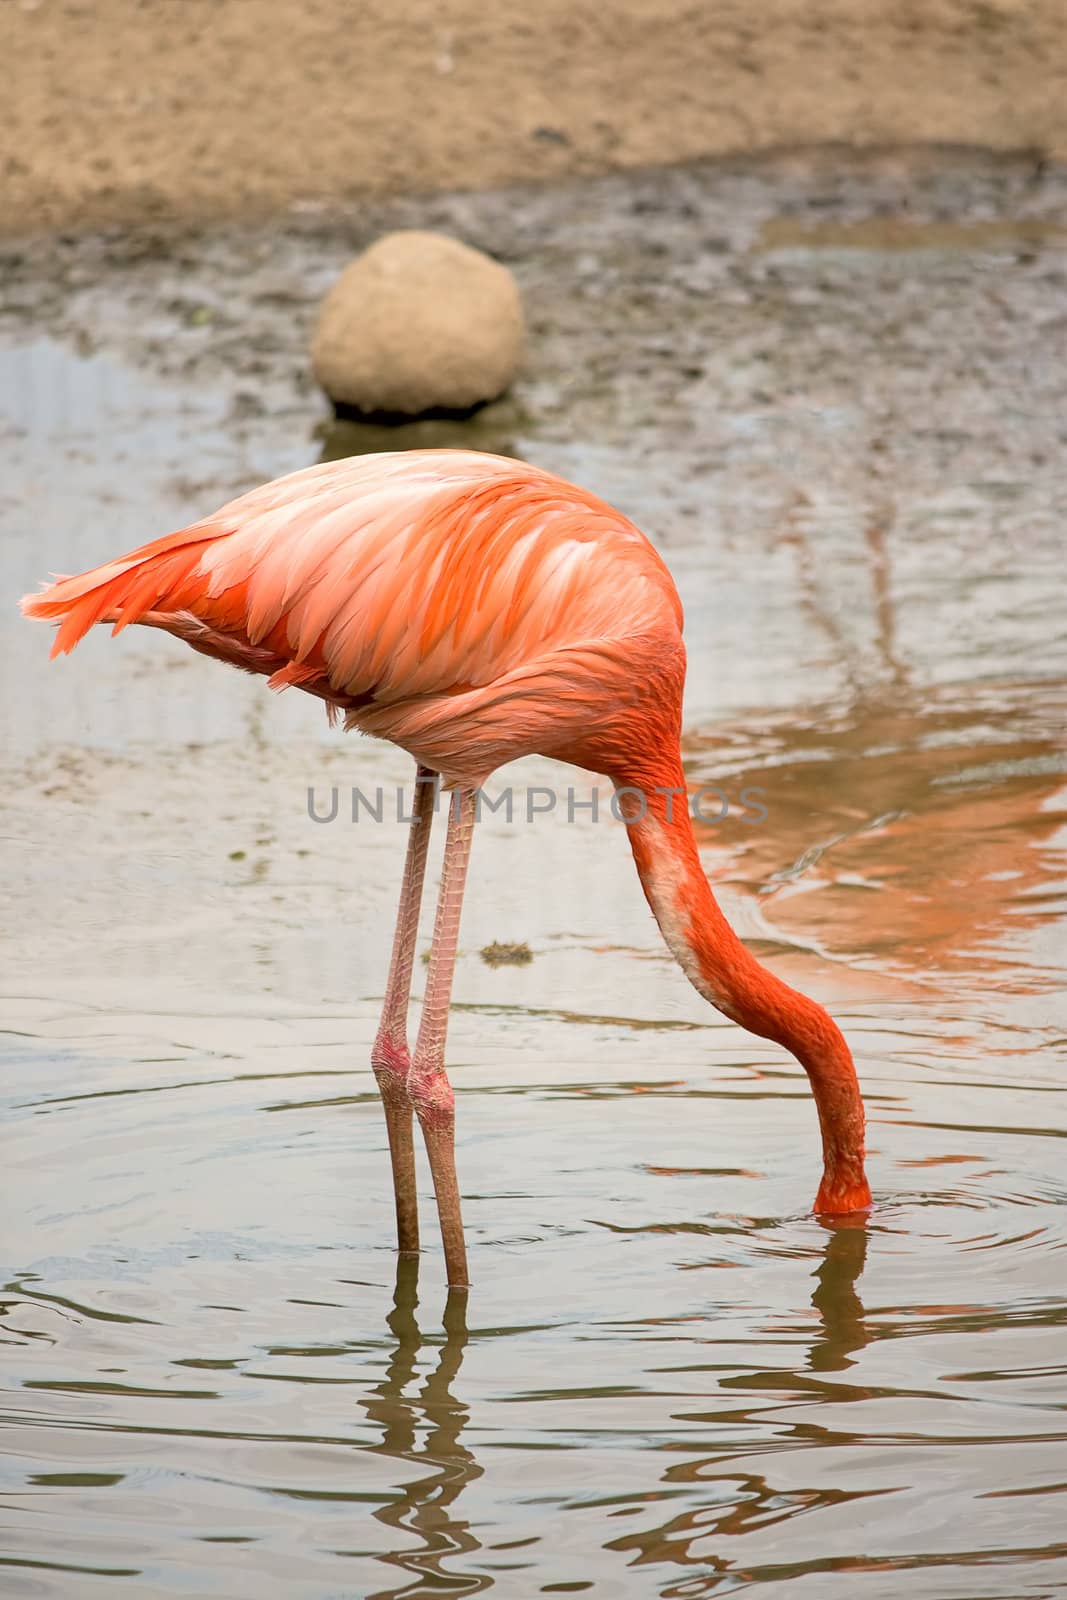 Flamingo bent her head into water. Picture was taken at zoo.